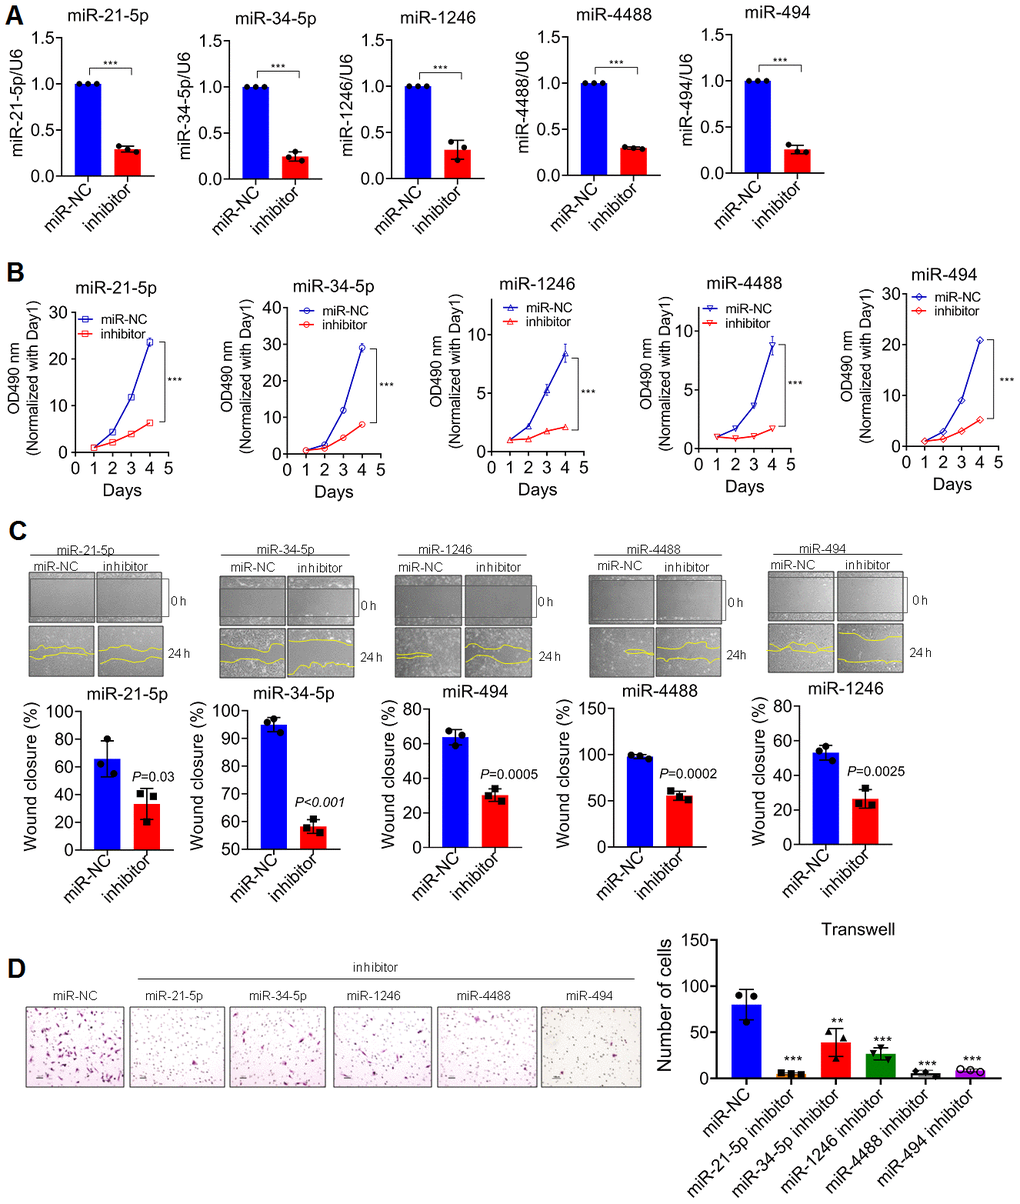 DGCR8 produces a pro-growth miRNA Profile that promotes Cell Proliferation. (A) knock-down efficiency detected by qRT-PCR of transient silencing of miRNA that down-regulated in T87G cells when DGCR8 was knocked down. miR-NC, miR-scramble; Inhibitor, a contraction of miRNA inhibitor. Two-tailed, unpaired T-test was used to analyze the significant difference (miR-21-5p, t=38.44, df=4, PB) MTT assay was performed on T87G cells whose endogenous miRNAs, as shown, were transiently knocked down. Two-tailed, unpaired T-test was used to analyze the significant difference, *** PC) Wound closure assay was conducted in parallel with MTT assays to appraise the migratory variation in T87G cells. Two-tailed, independent T-test was used to analyze the significant difference. (D) Transwell assays were carried out to analyze the invasive variation after differential miRNAs were transiently knocked down in T87G cells. One way ANOVA (Bonferroni approach) was taken to analyze the significant difference among groups in comparison with control group transfected with miR-NC. Here, ** P